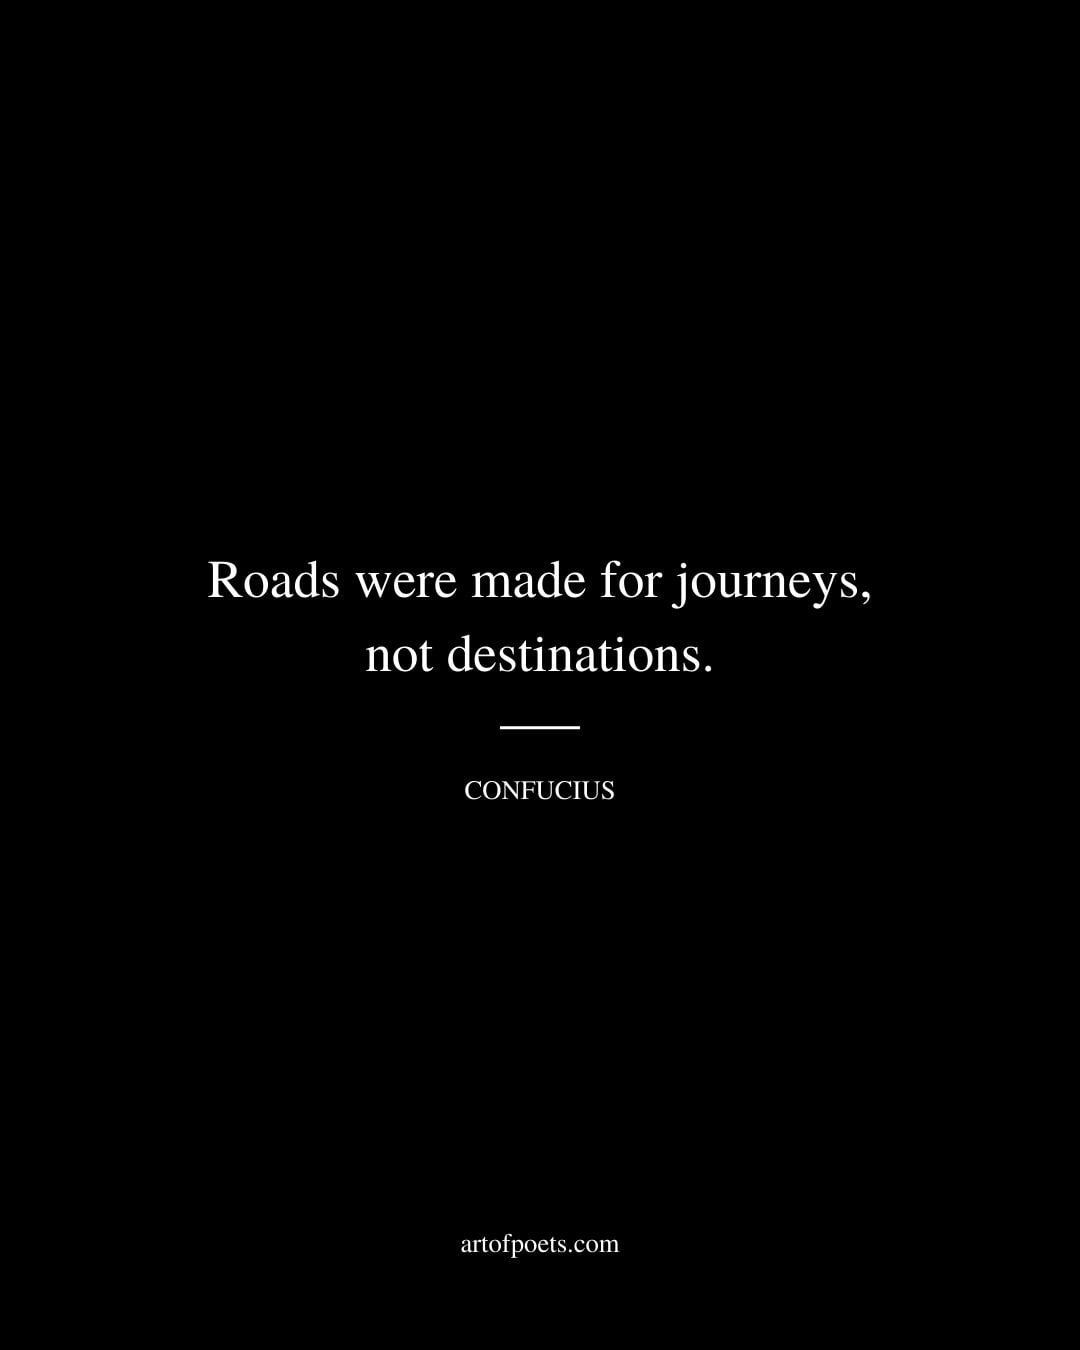 Roads were made for journeys not destinations 1